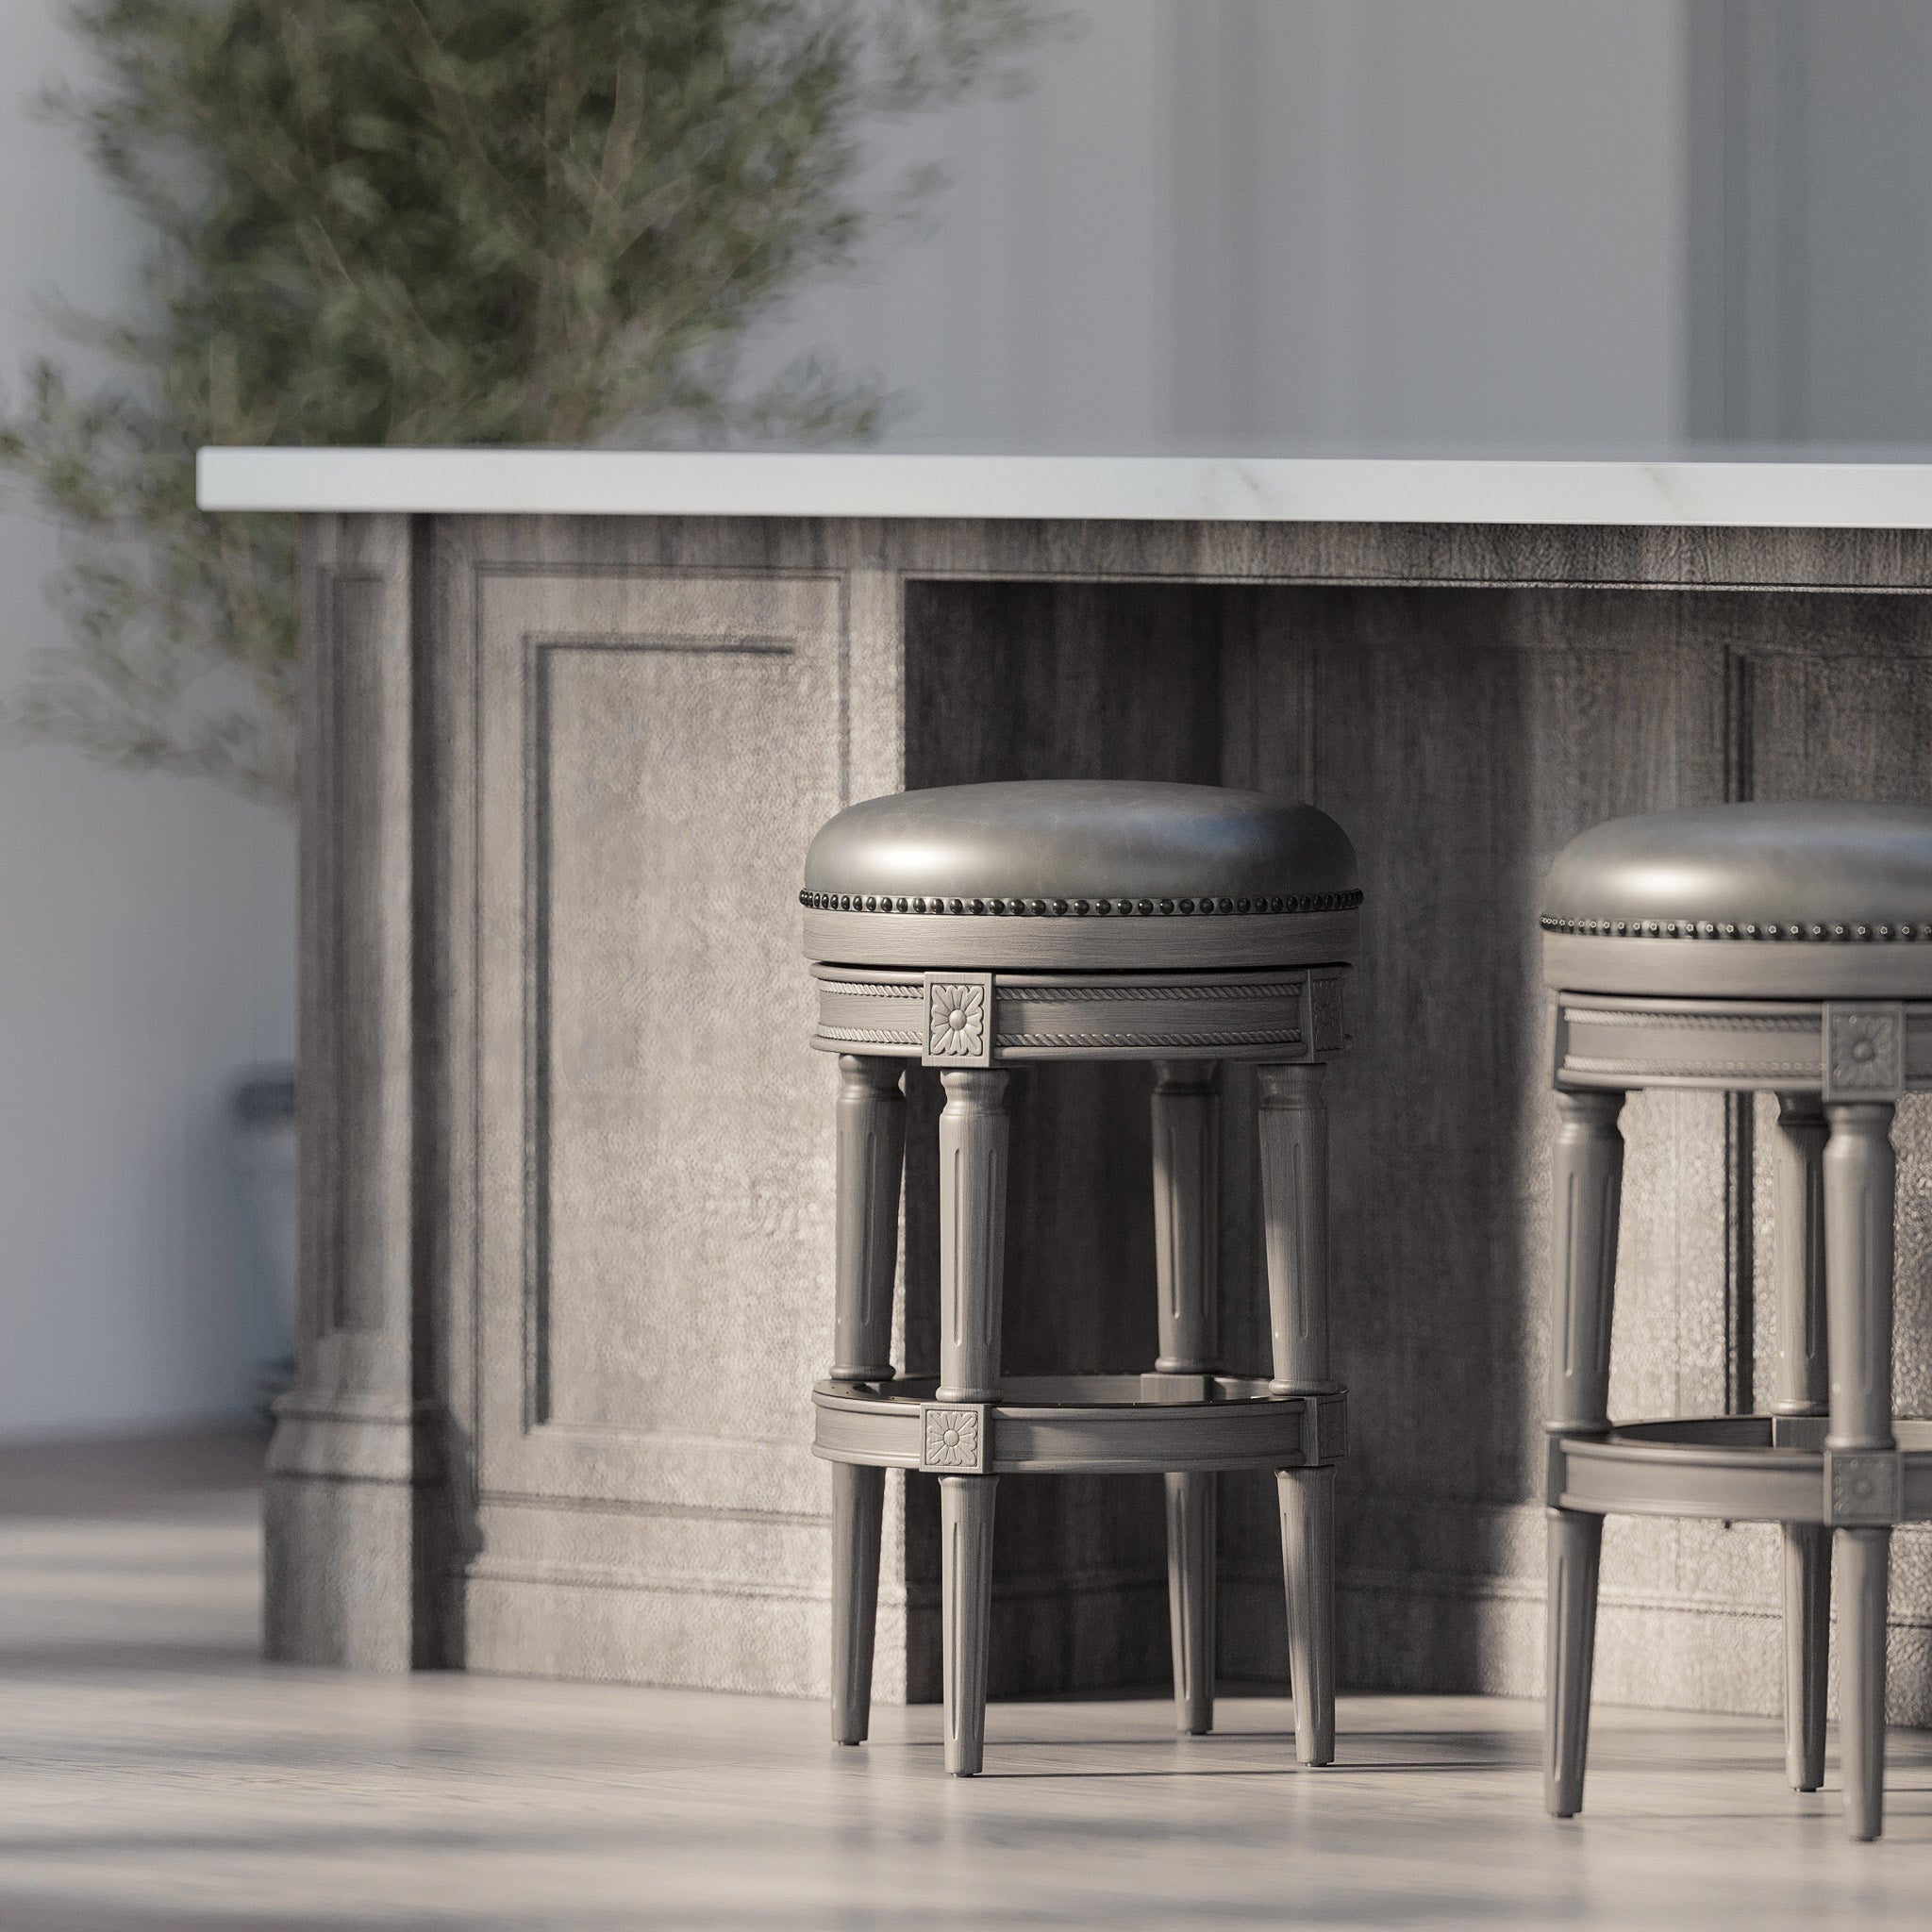 Pullman Backless Bar Stool in Reclaimed Oak Finish with Ronan Stone Vegan Leather in Stools by Maven Lane